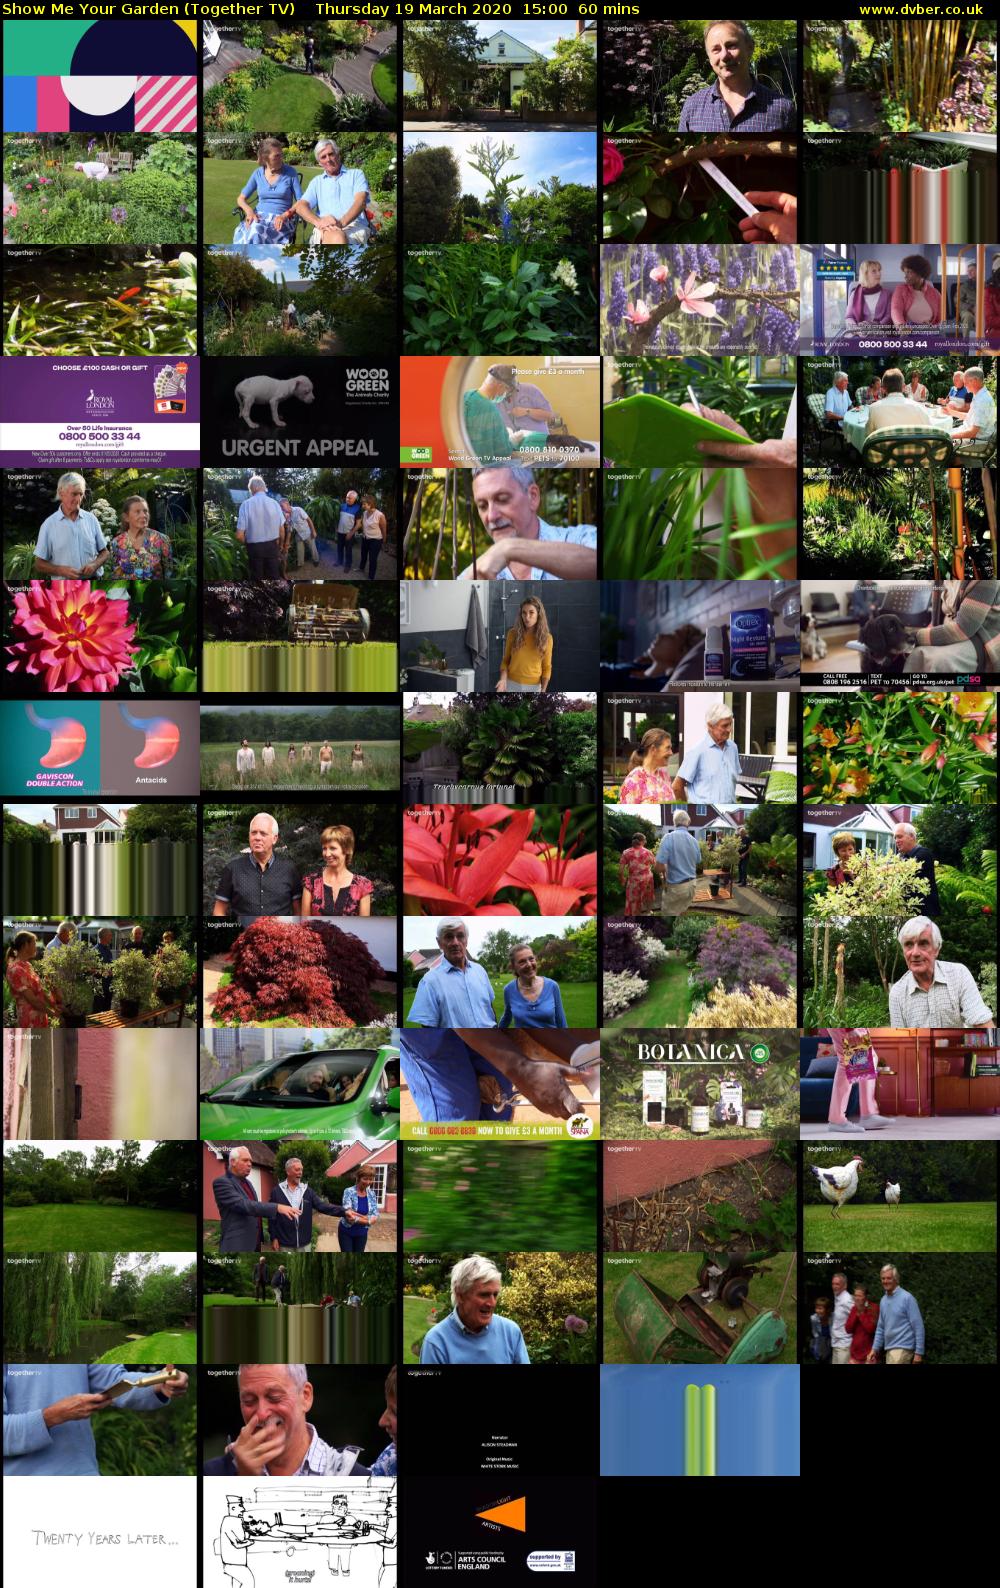 Show Me Your Garden (Together TV) Thursday 19 March 2020 15:00 - 16:00